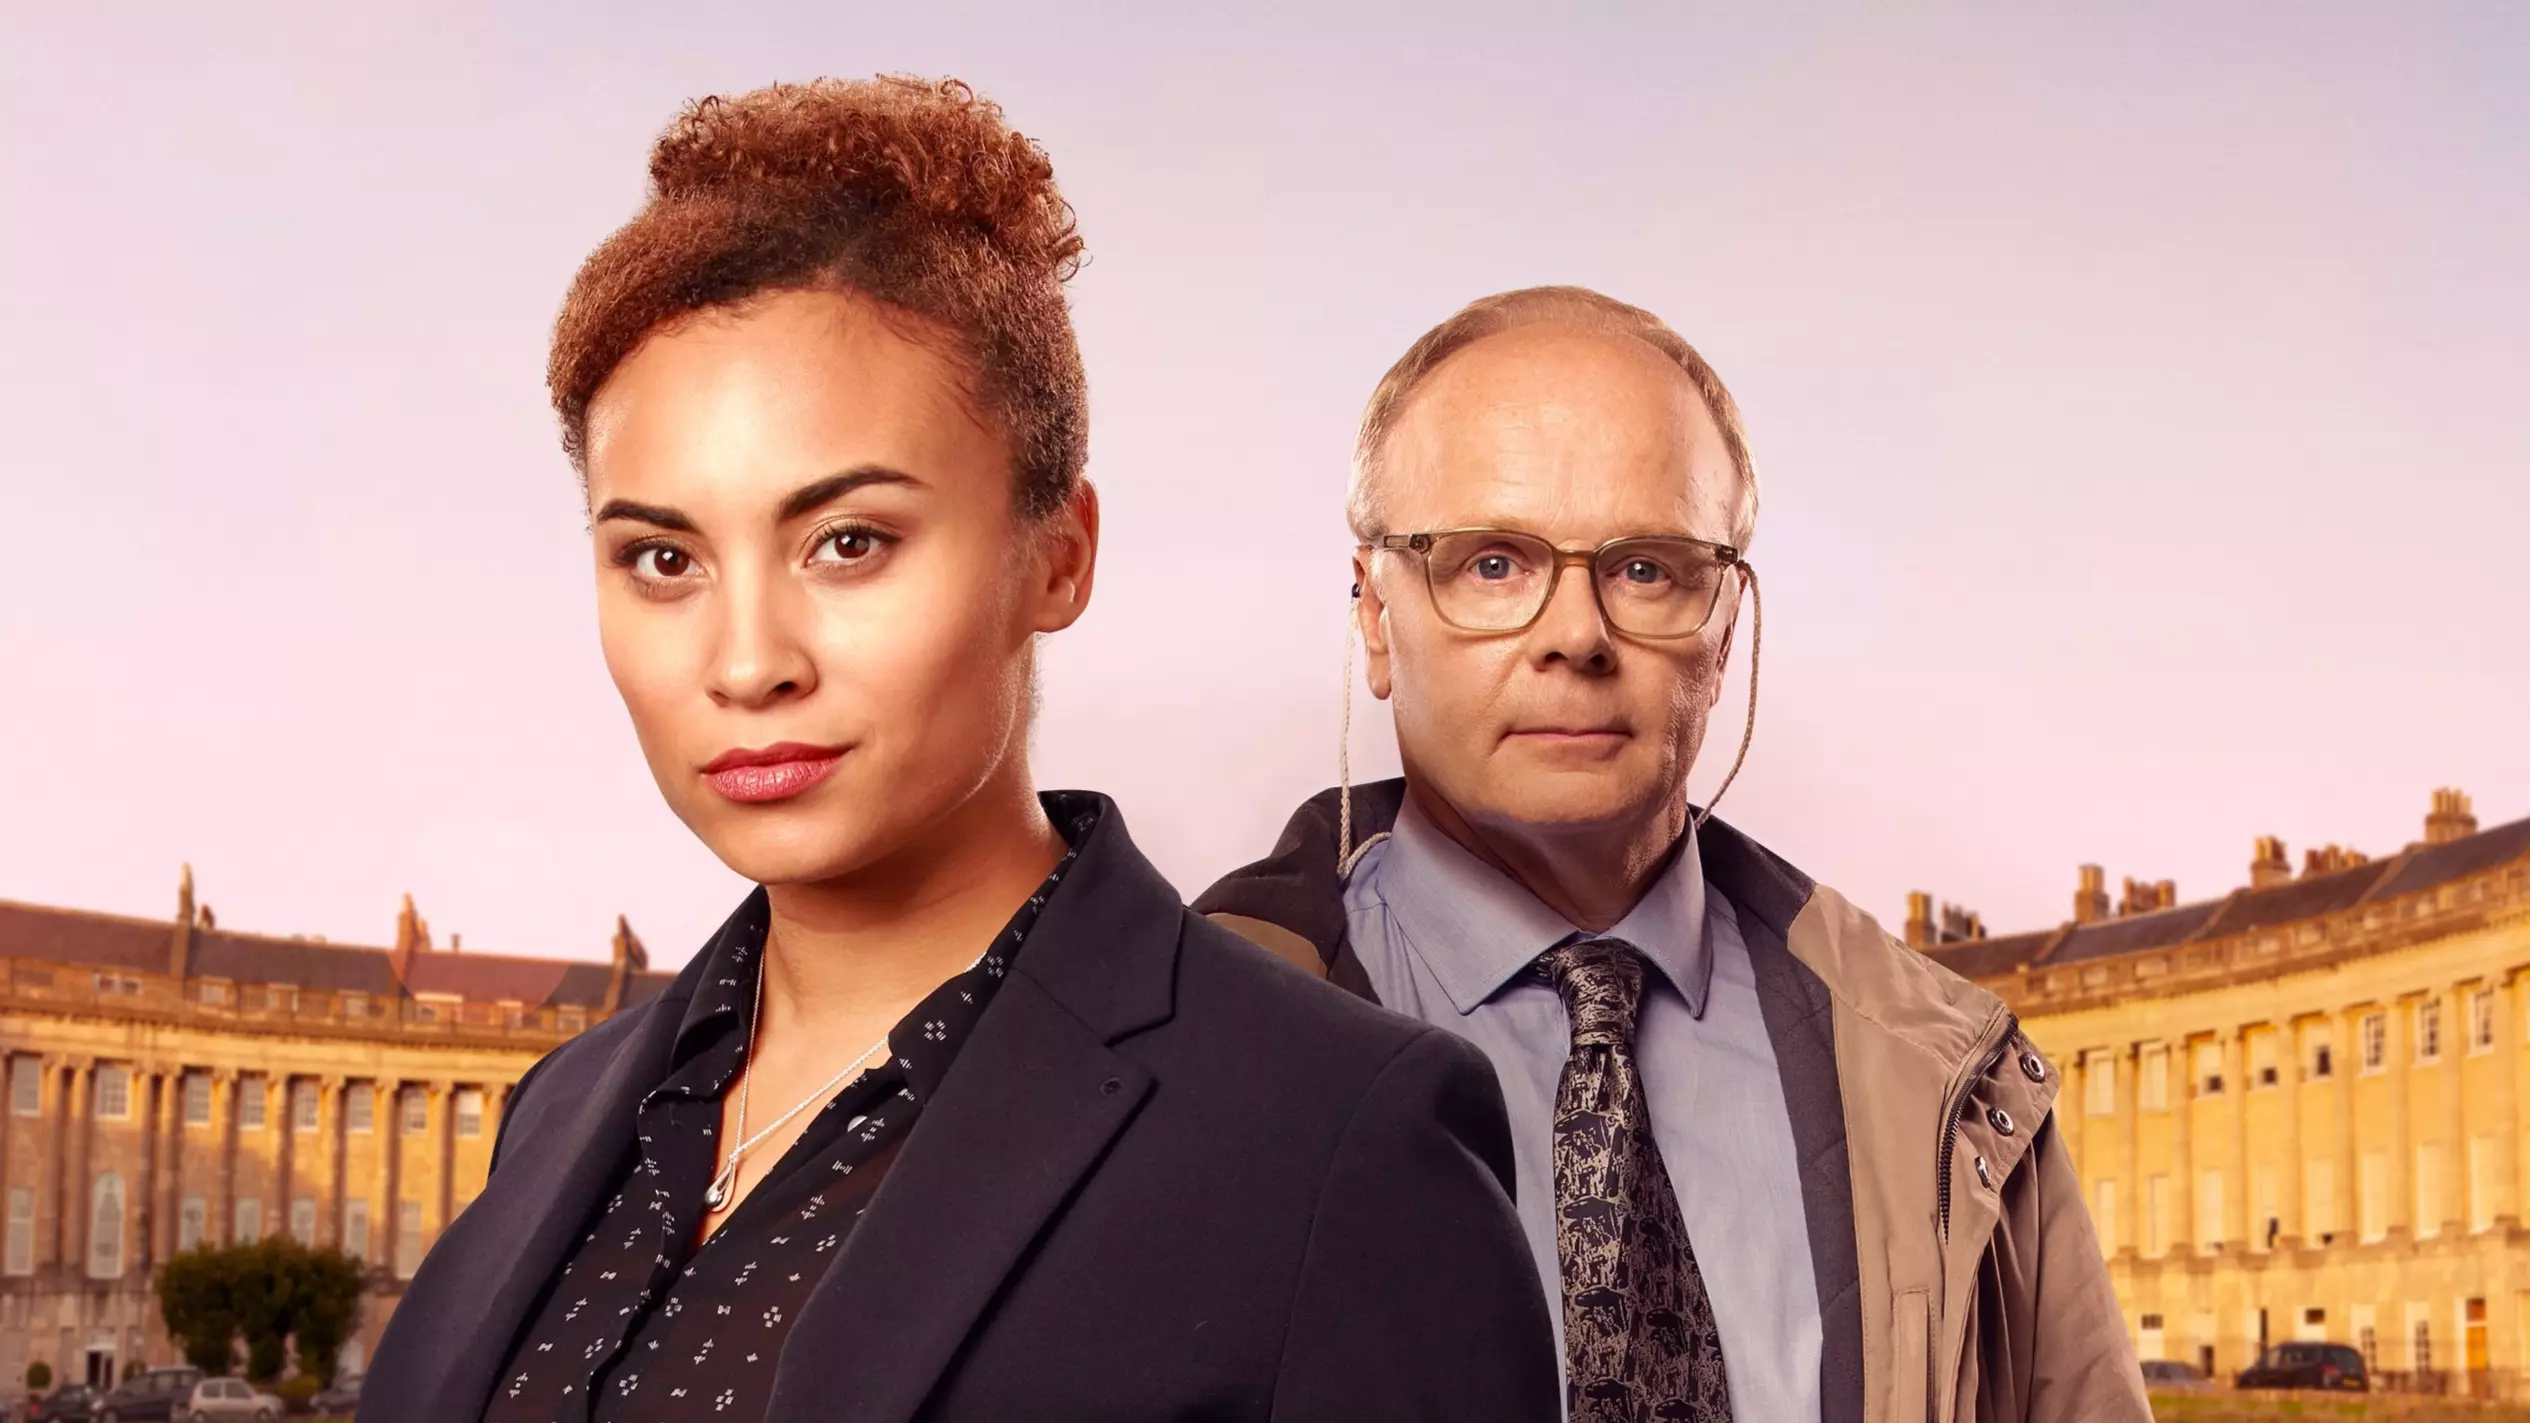 ITV Releases Trailer For New Police Drama ‘McDonald & Dodds’